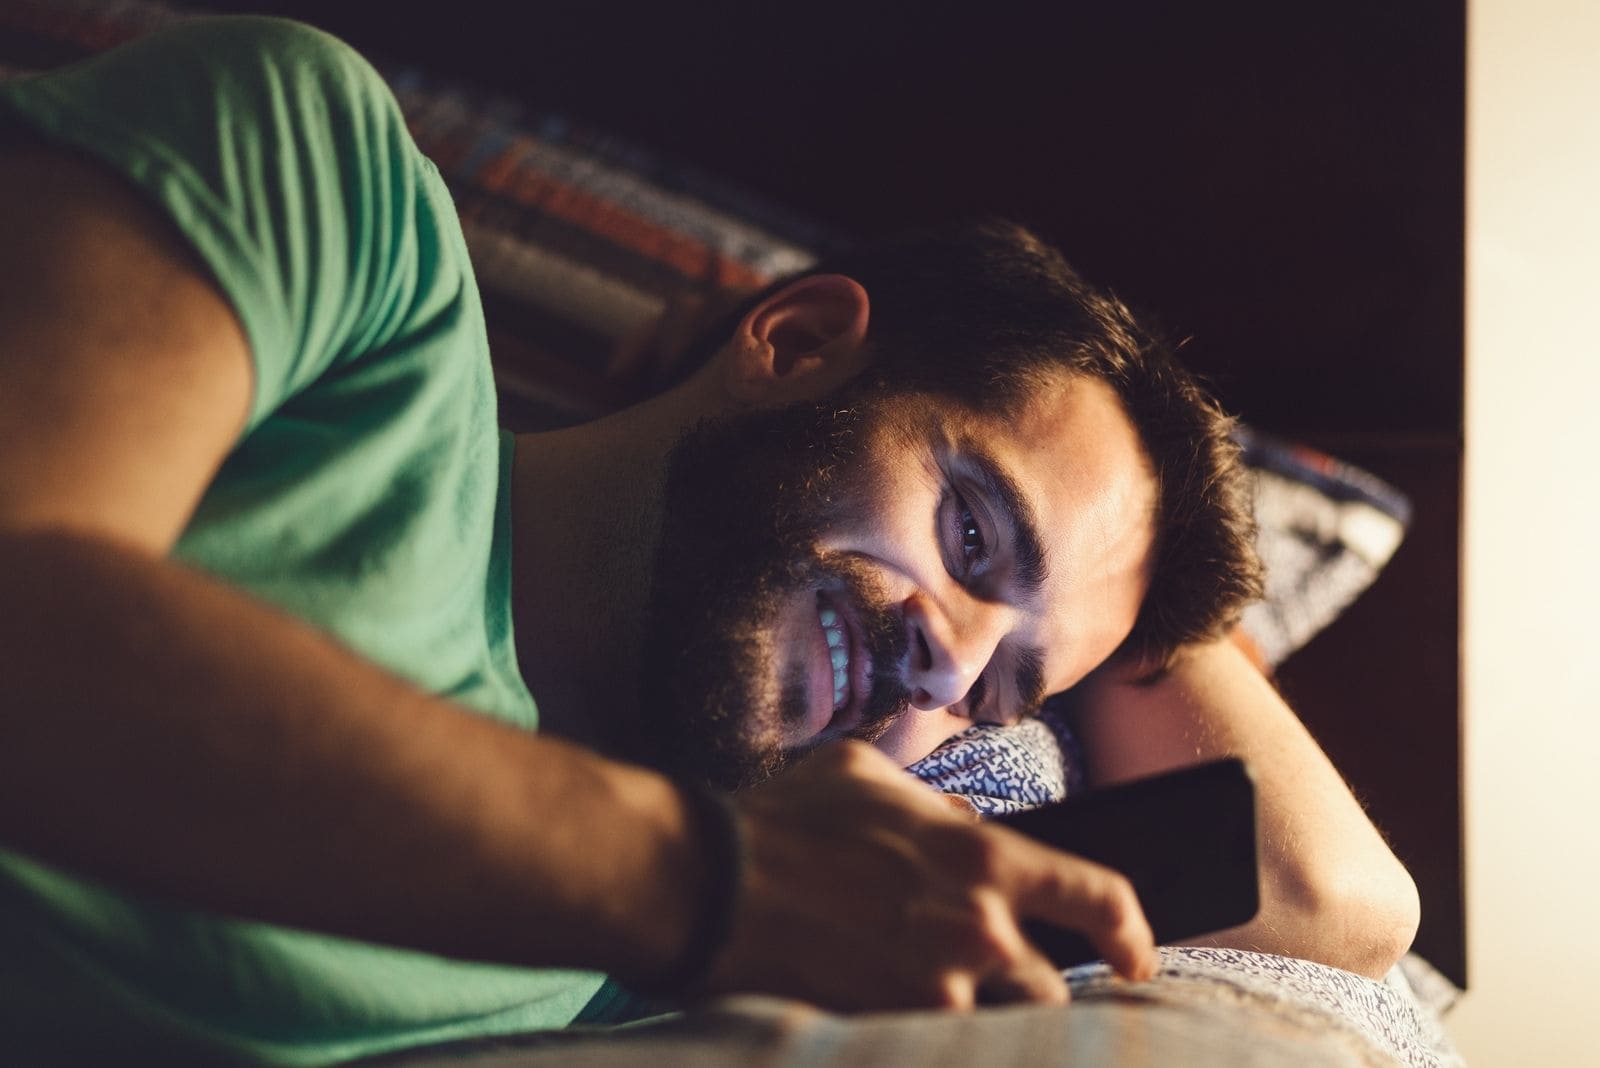 man smiling and lying down iin bed while reading messages from smartphone with lights out